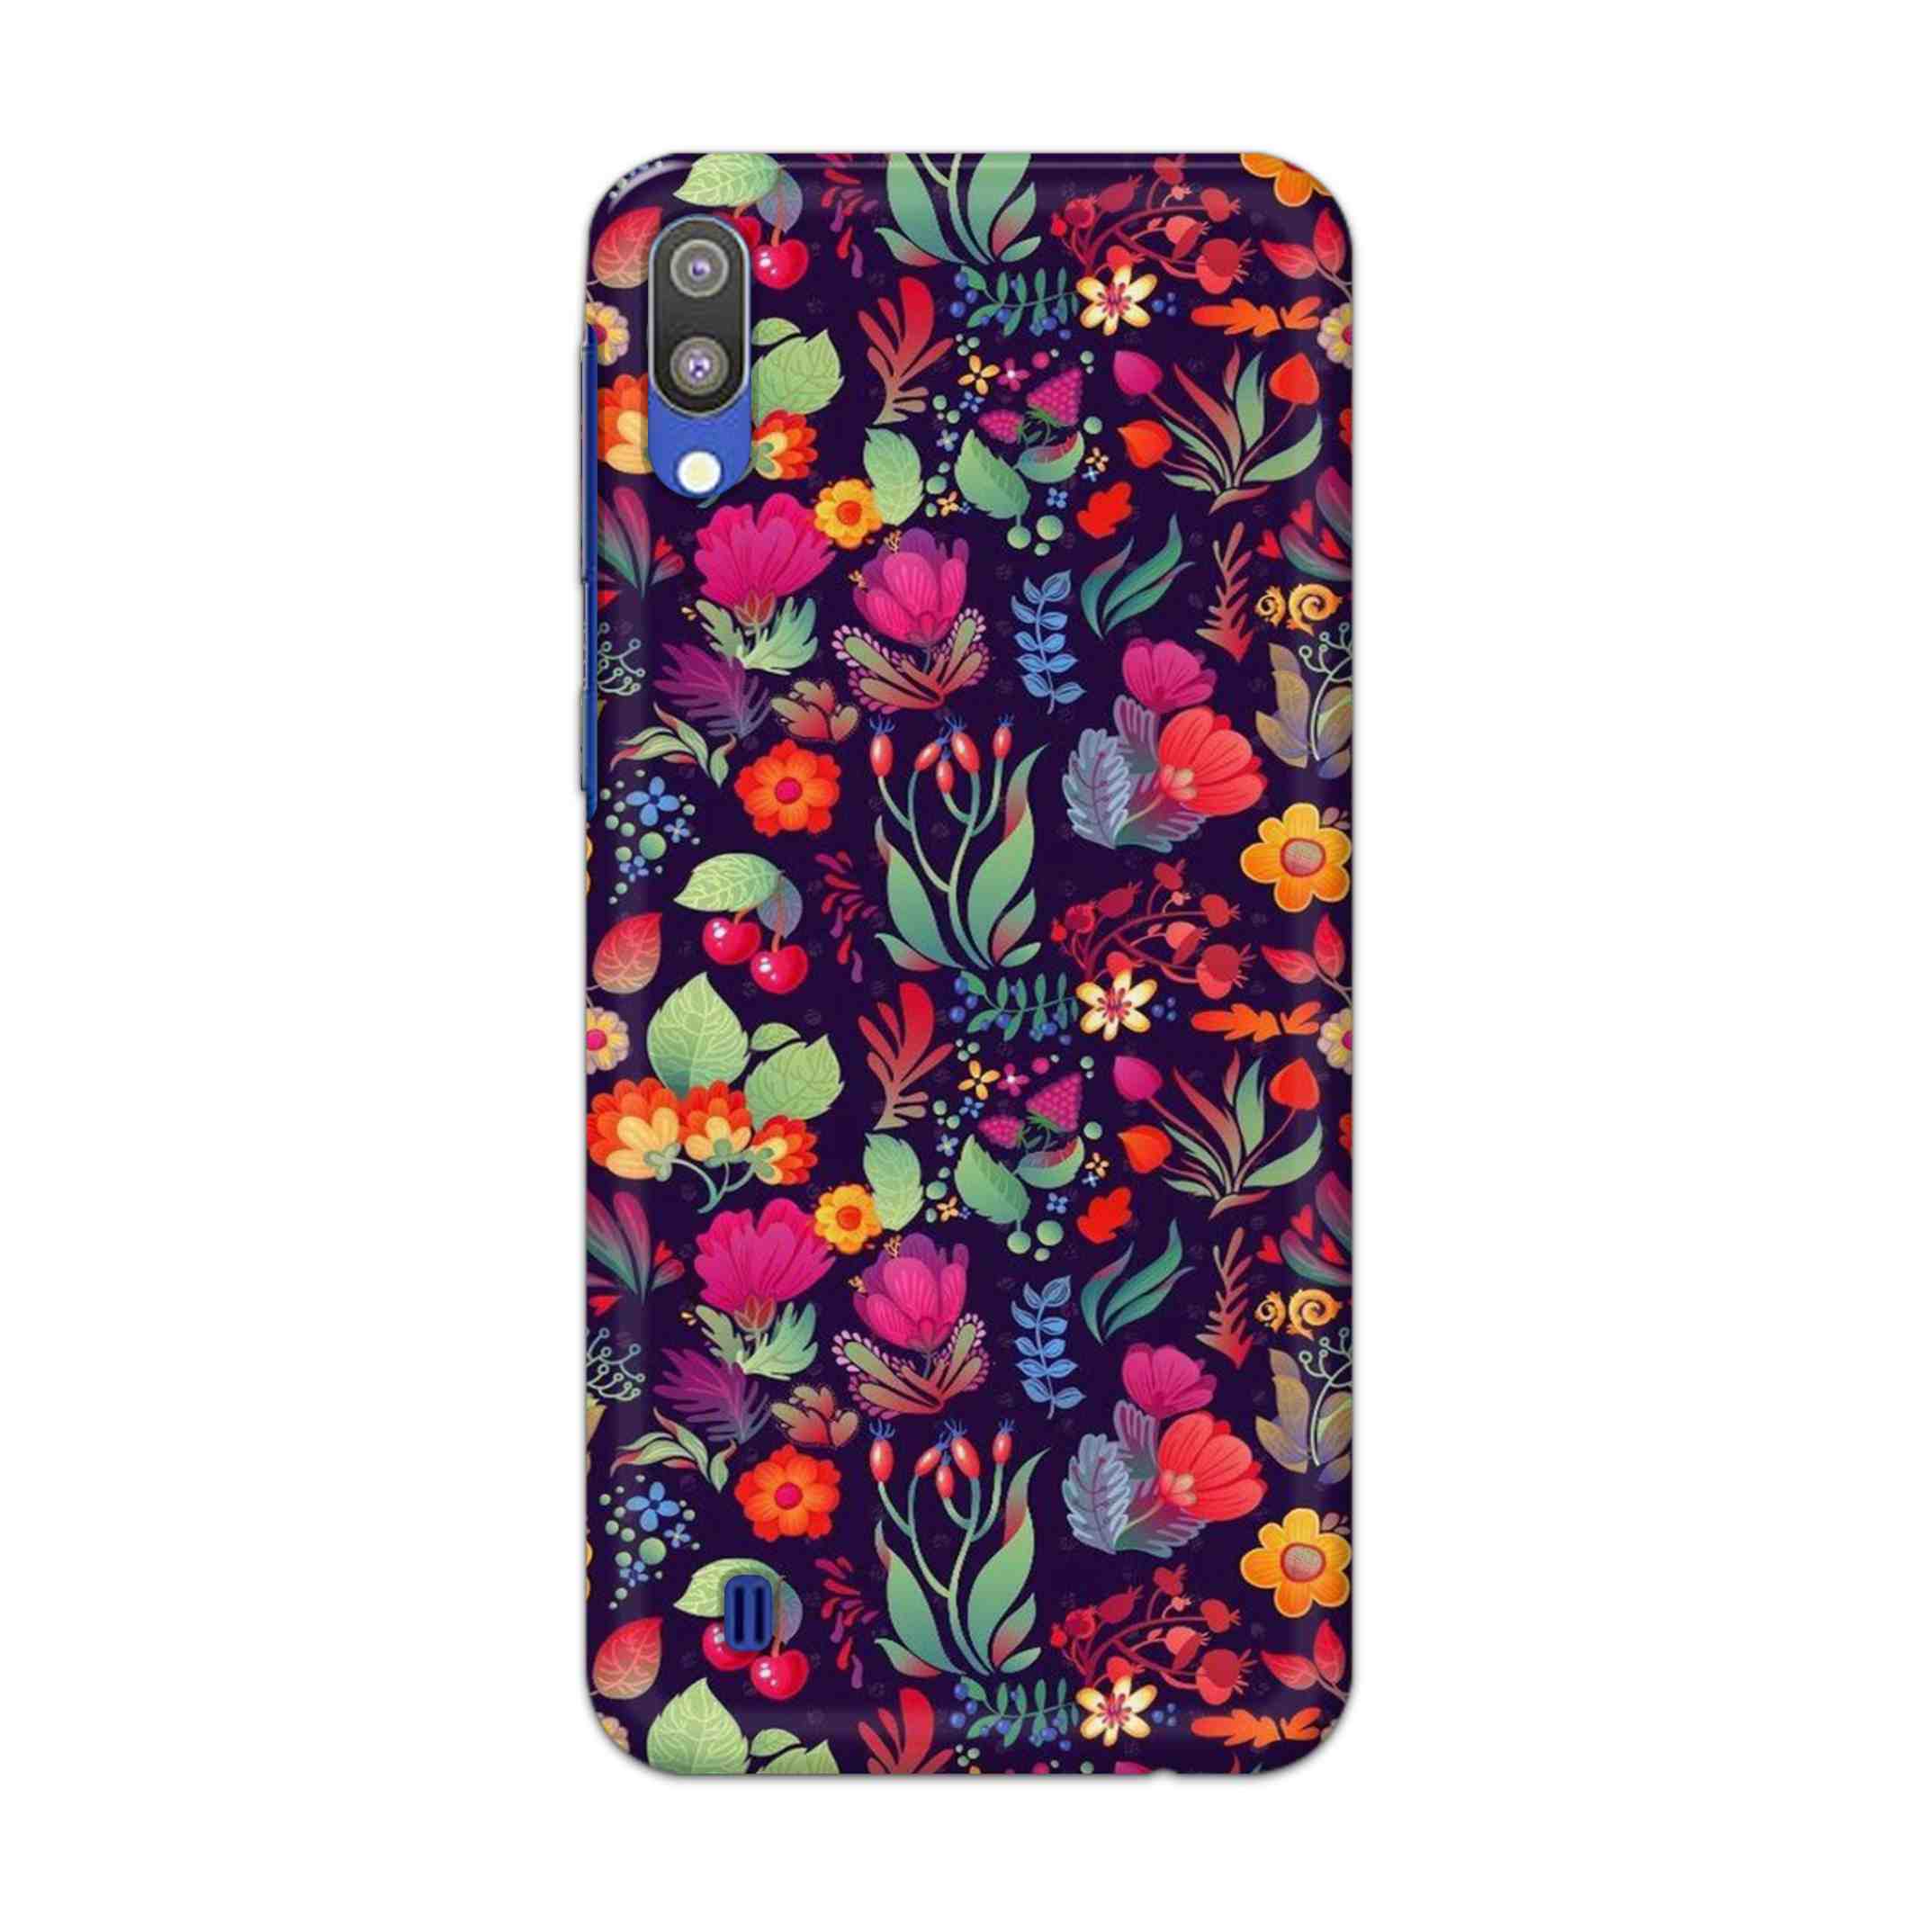 Buy Fruits Flower Hard Back Mobile Phone Case Cover For Samsung Galaxy M10 Online